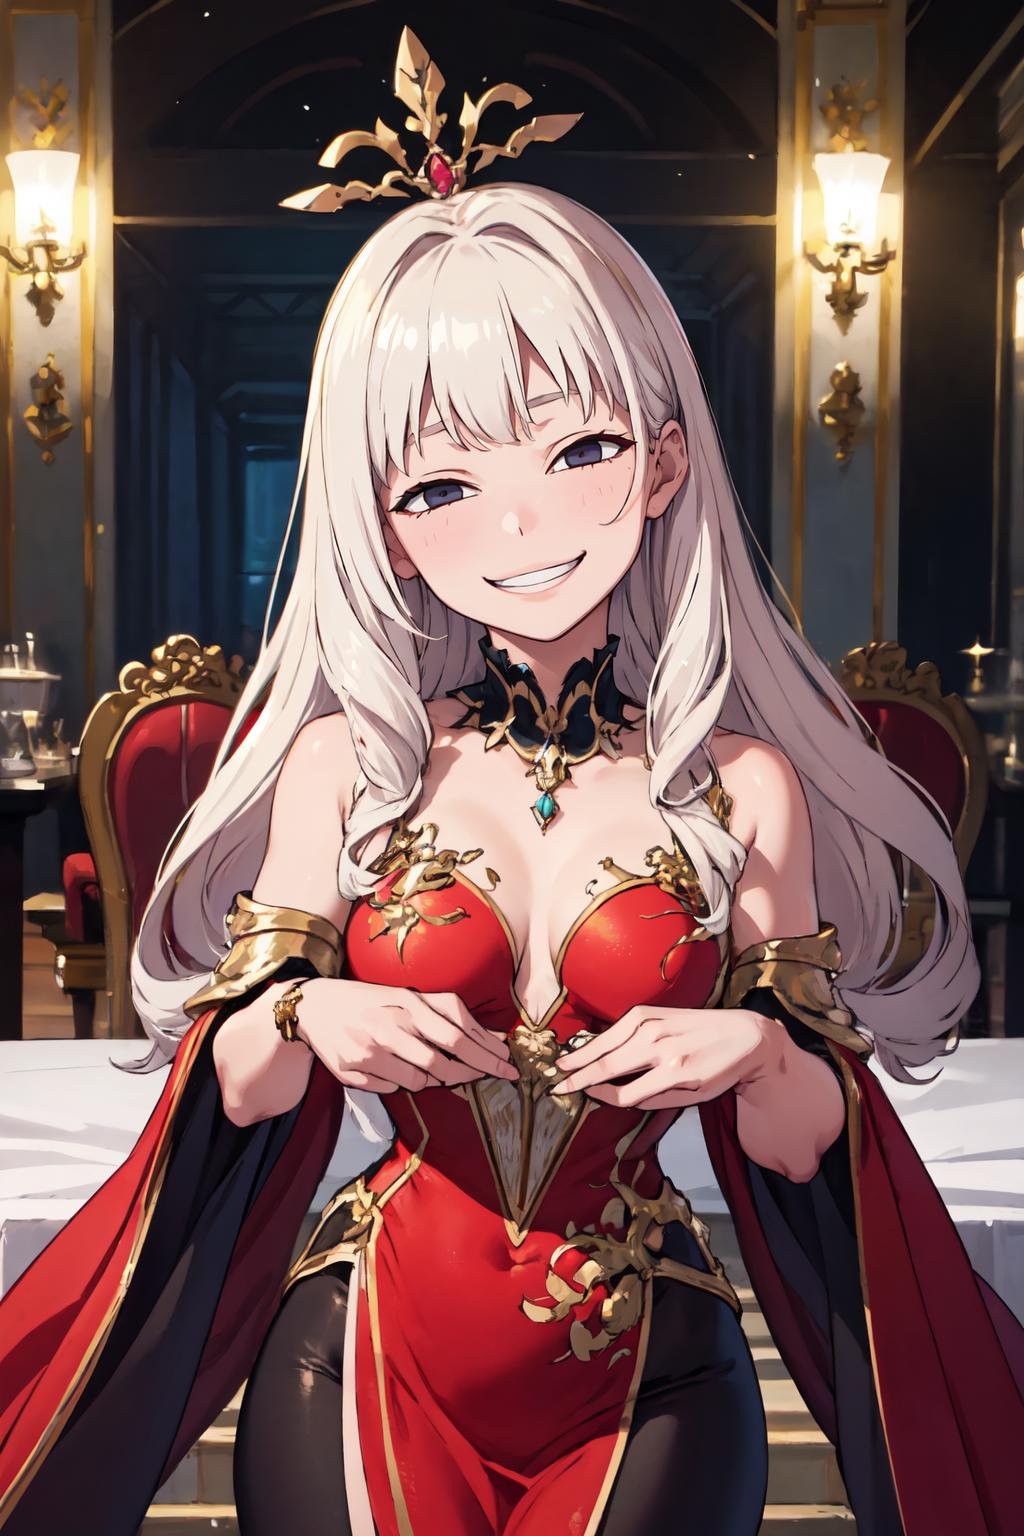 Highly detailed, High Quality, Masterpiece, beautiful, IncrsAnyasHehFaceMeme, grin, <lora:AnyasHehFaceMeme:1>, hc_gown, wearing hc_gown, <lora:Outfit_HauteCoutureGowns:0.7>